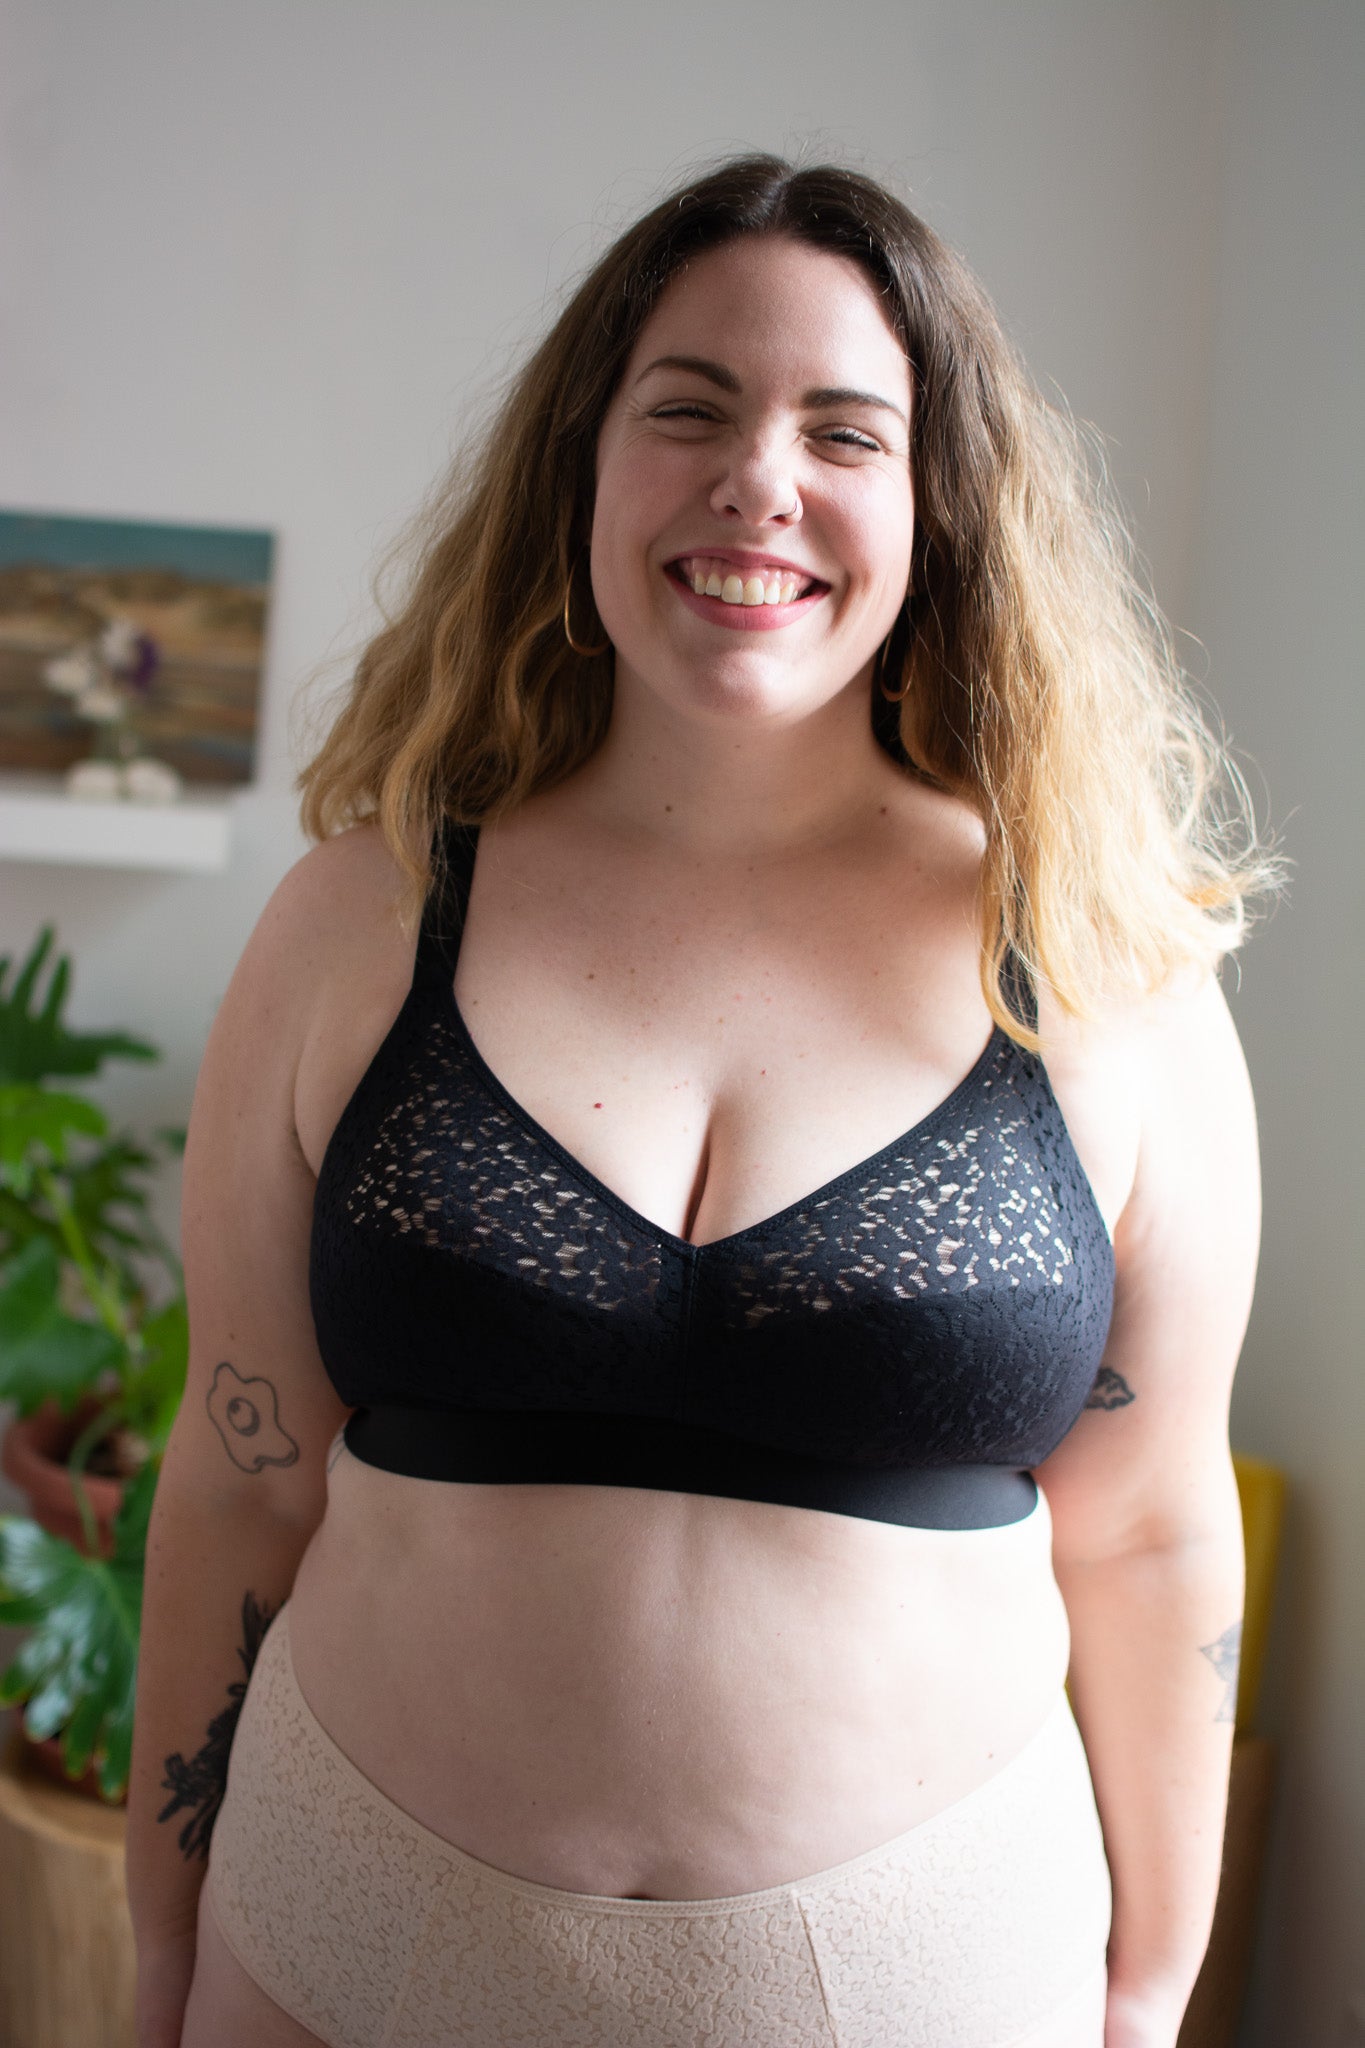 Chantelle Norah Comfort Supportive Wirefree Bra